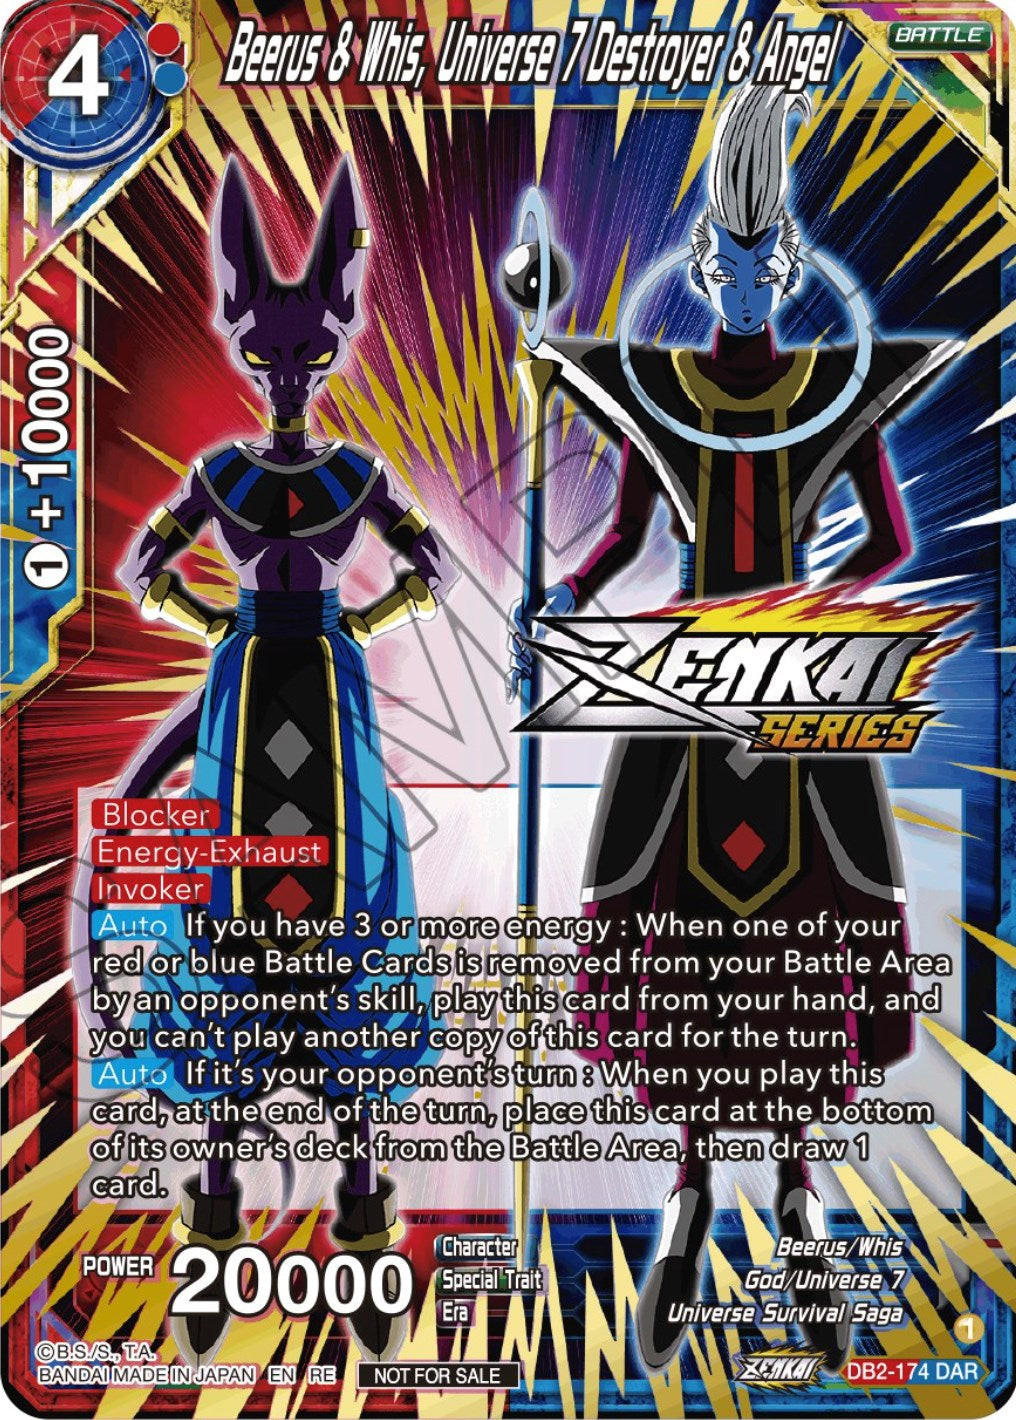 Beerus & Whis, Universe 7 Destroyer & Angel (Event Pack 12) (DB2-174) [Tournament Promotion Cards] | Fandemonia Ltd